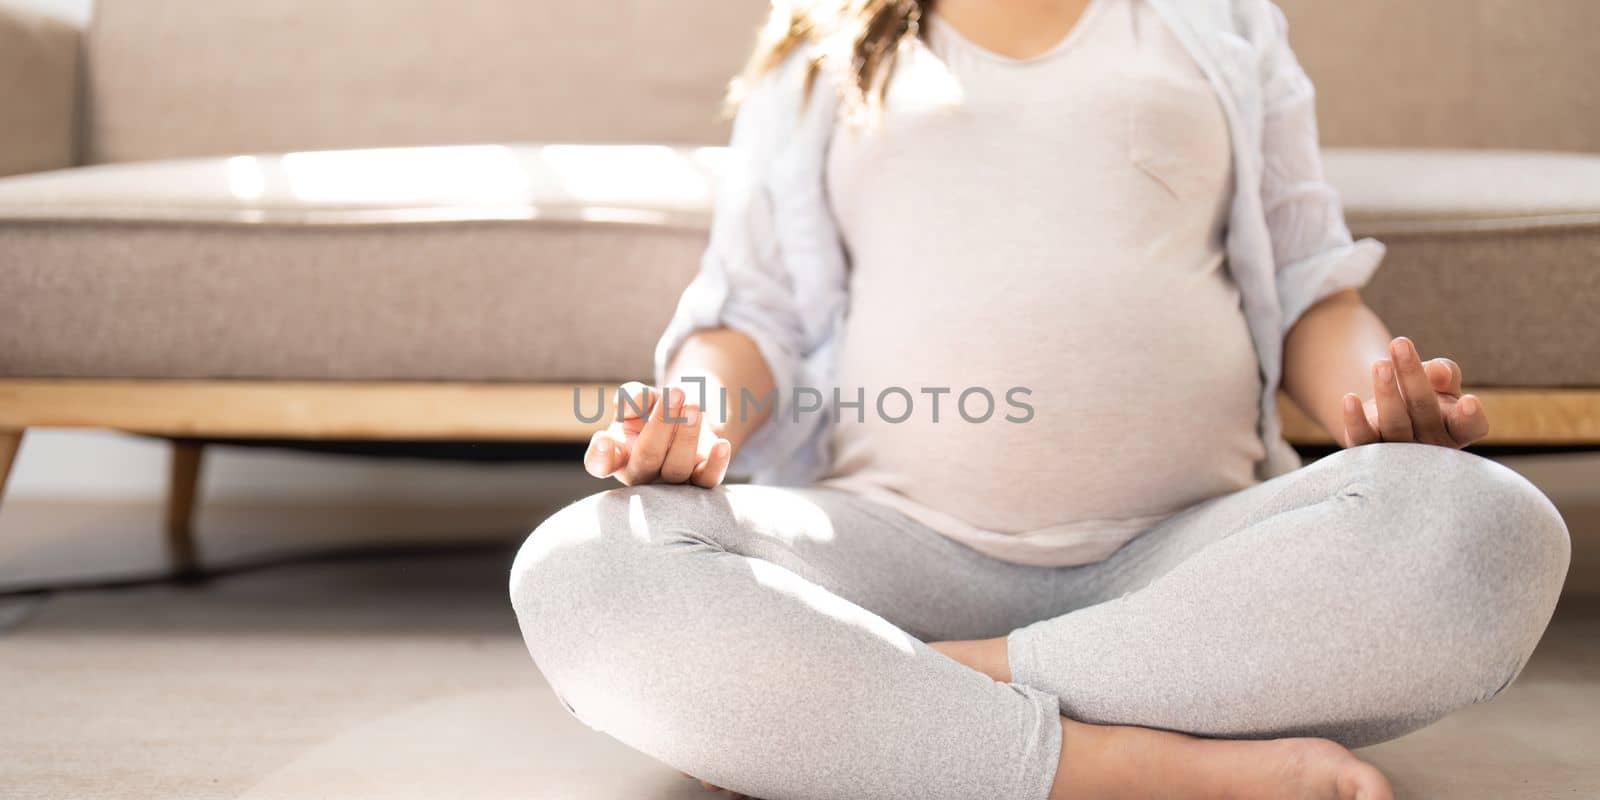 Relaxed Asian pregnant woman meditating in her living room, lotus pose, concentrating breath.